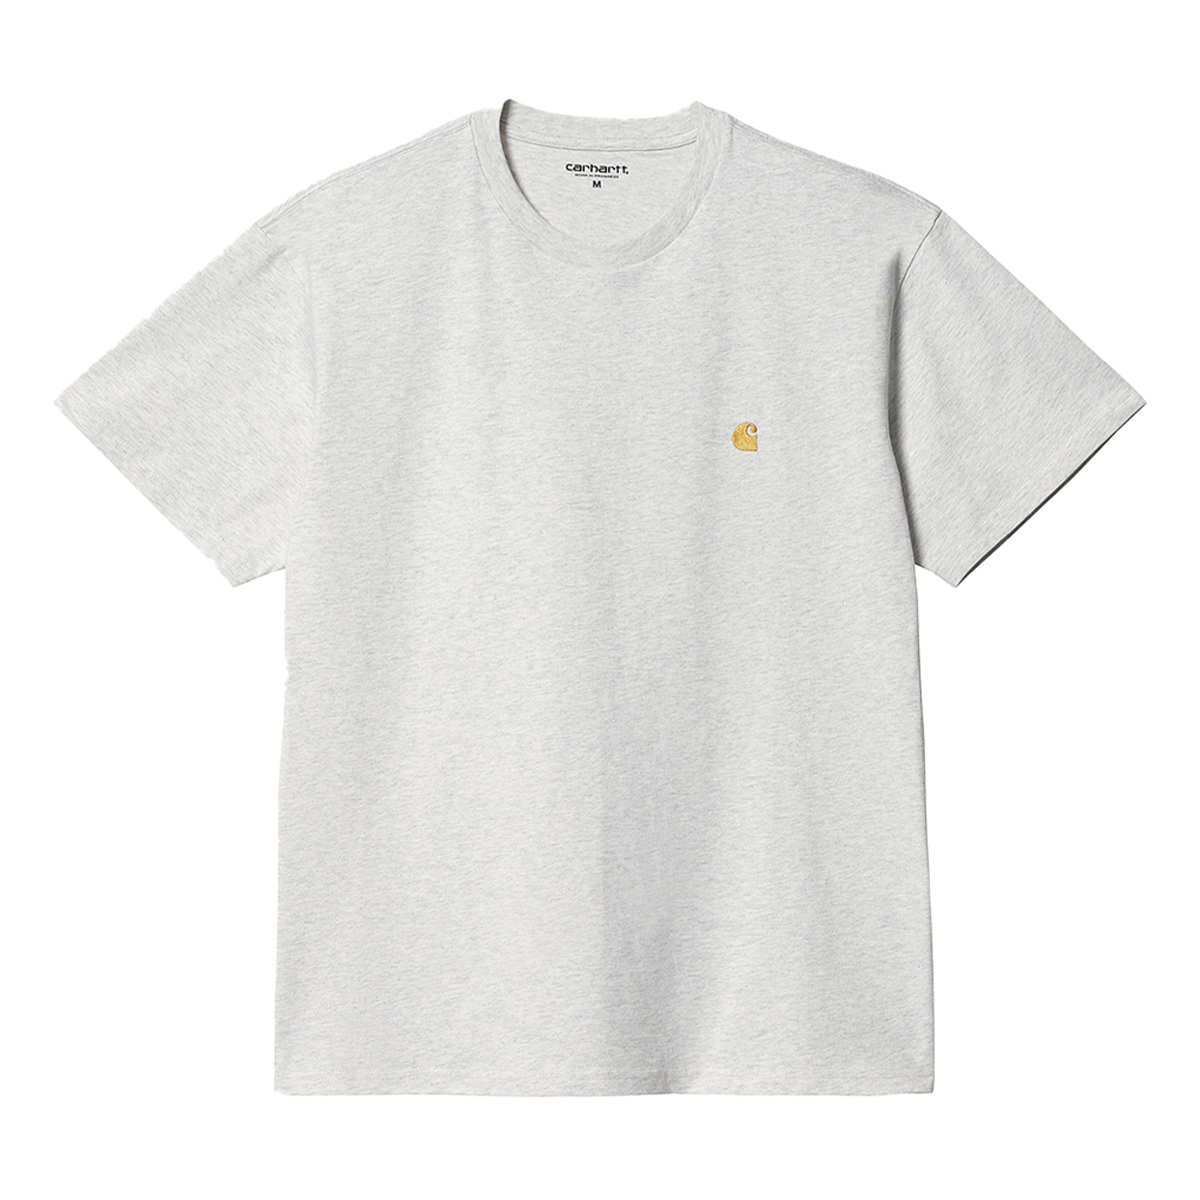 S/S Chase T-Shirt